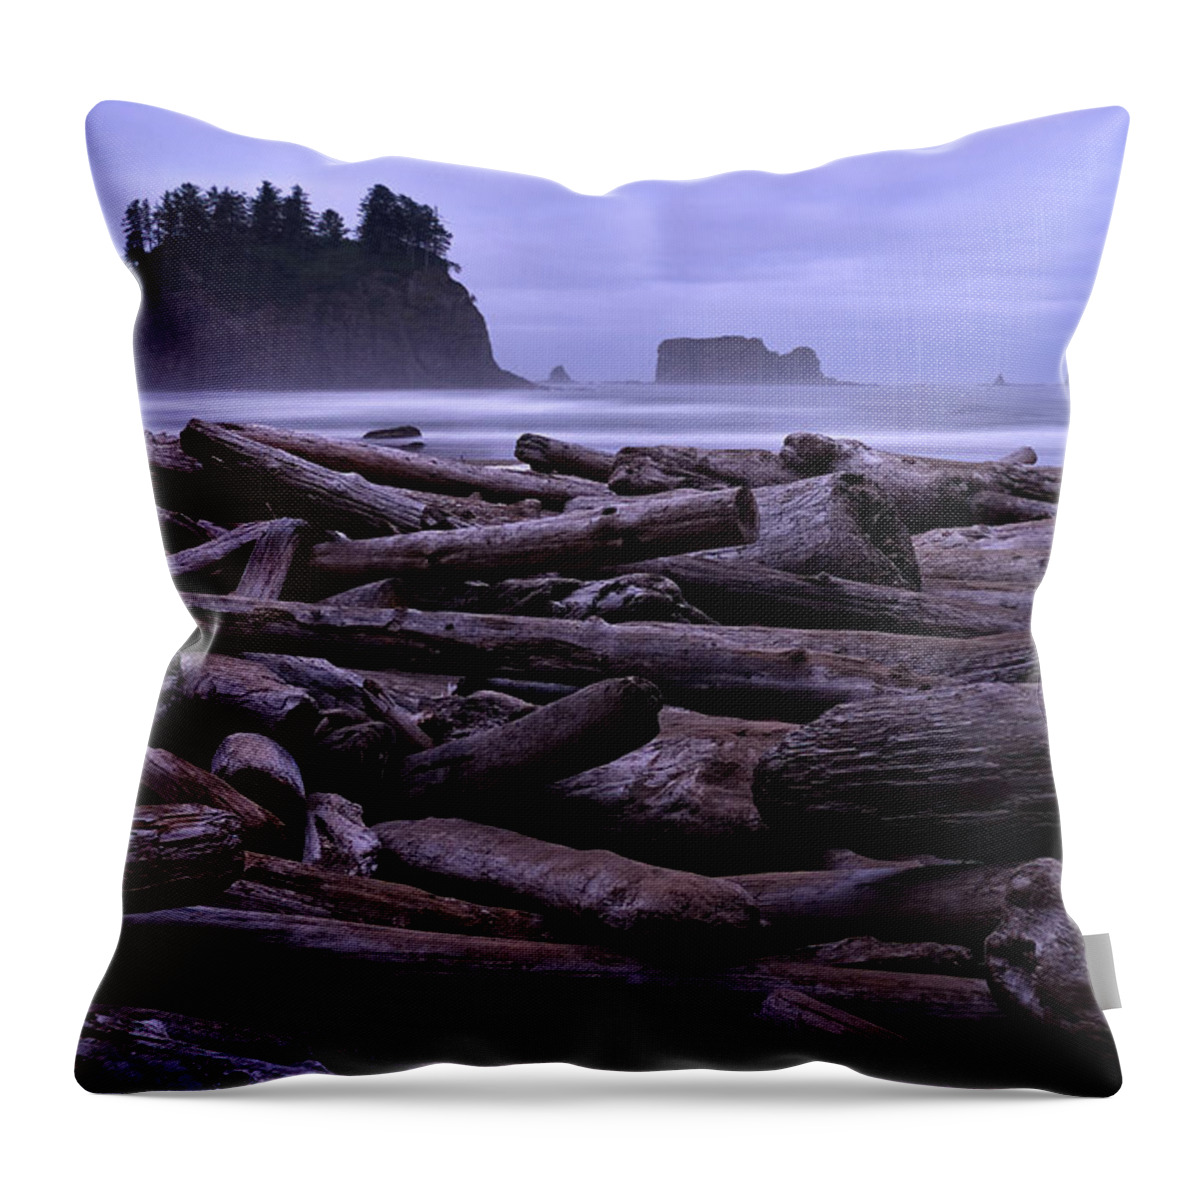 2011 Throw Pillow featuring the photograph Timber by Robert Charity